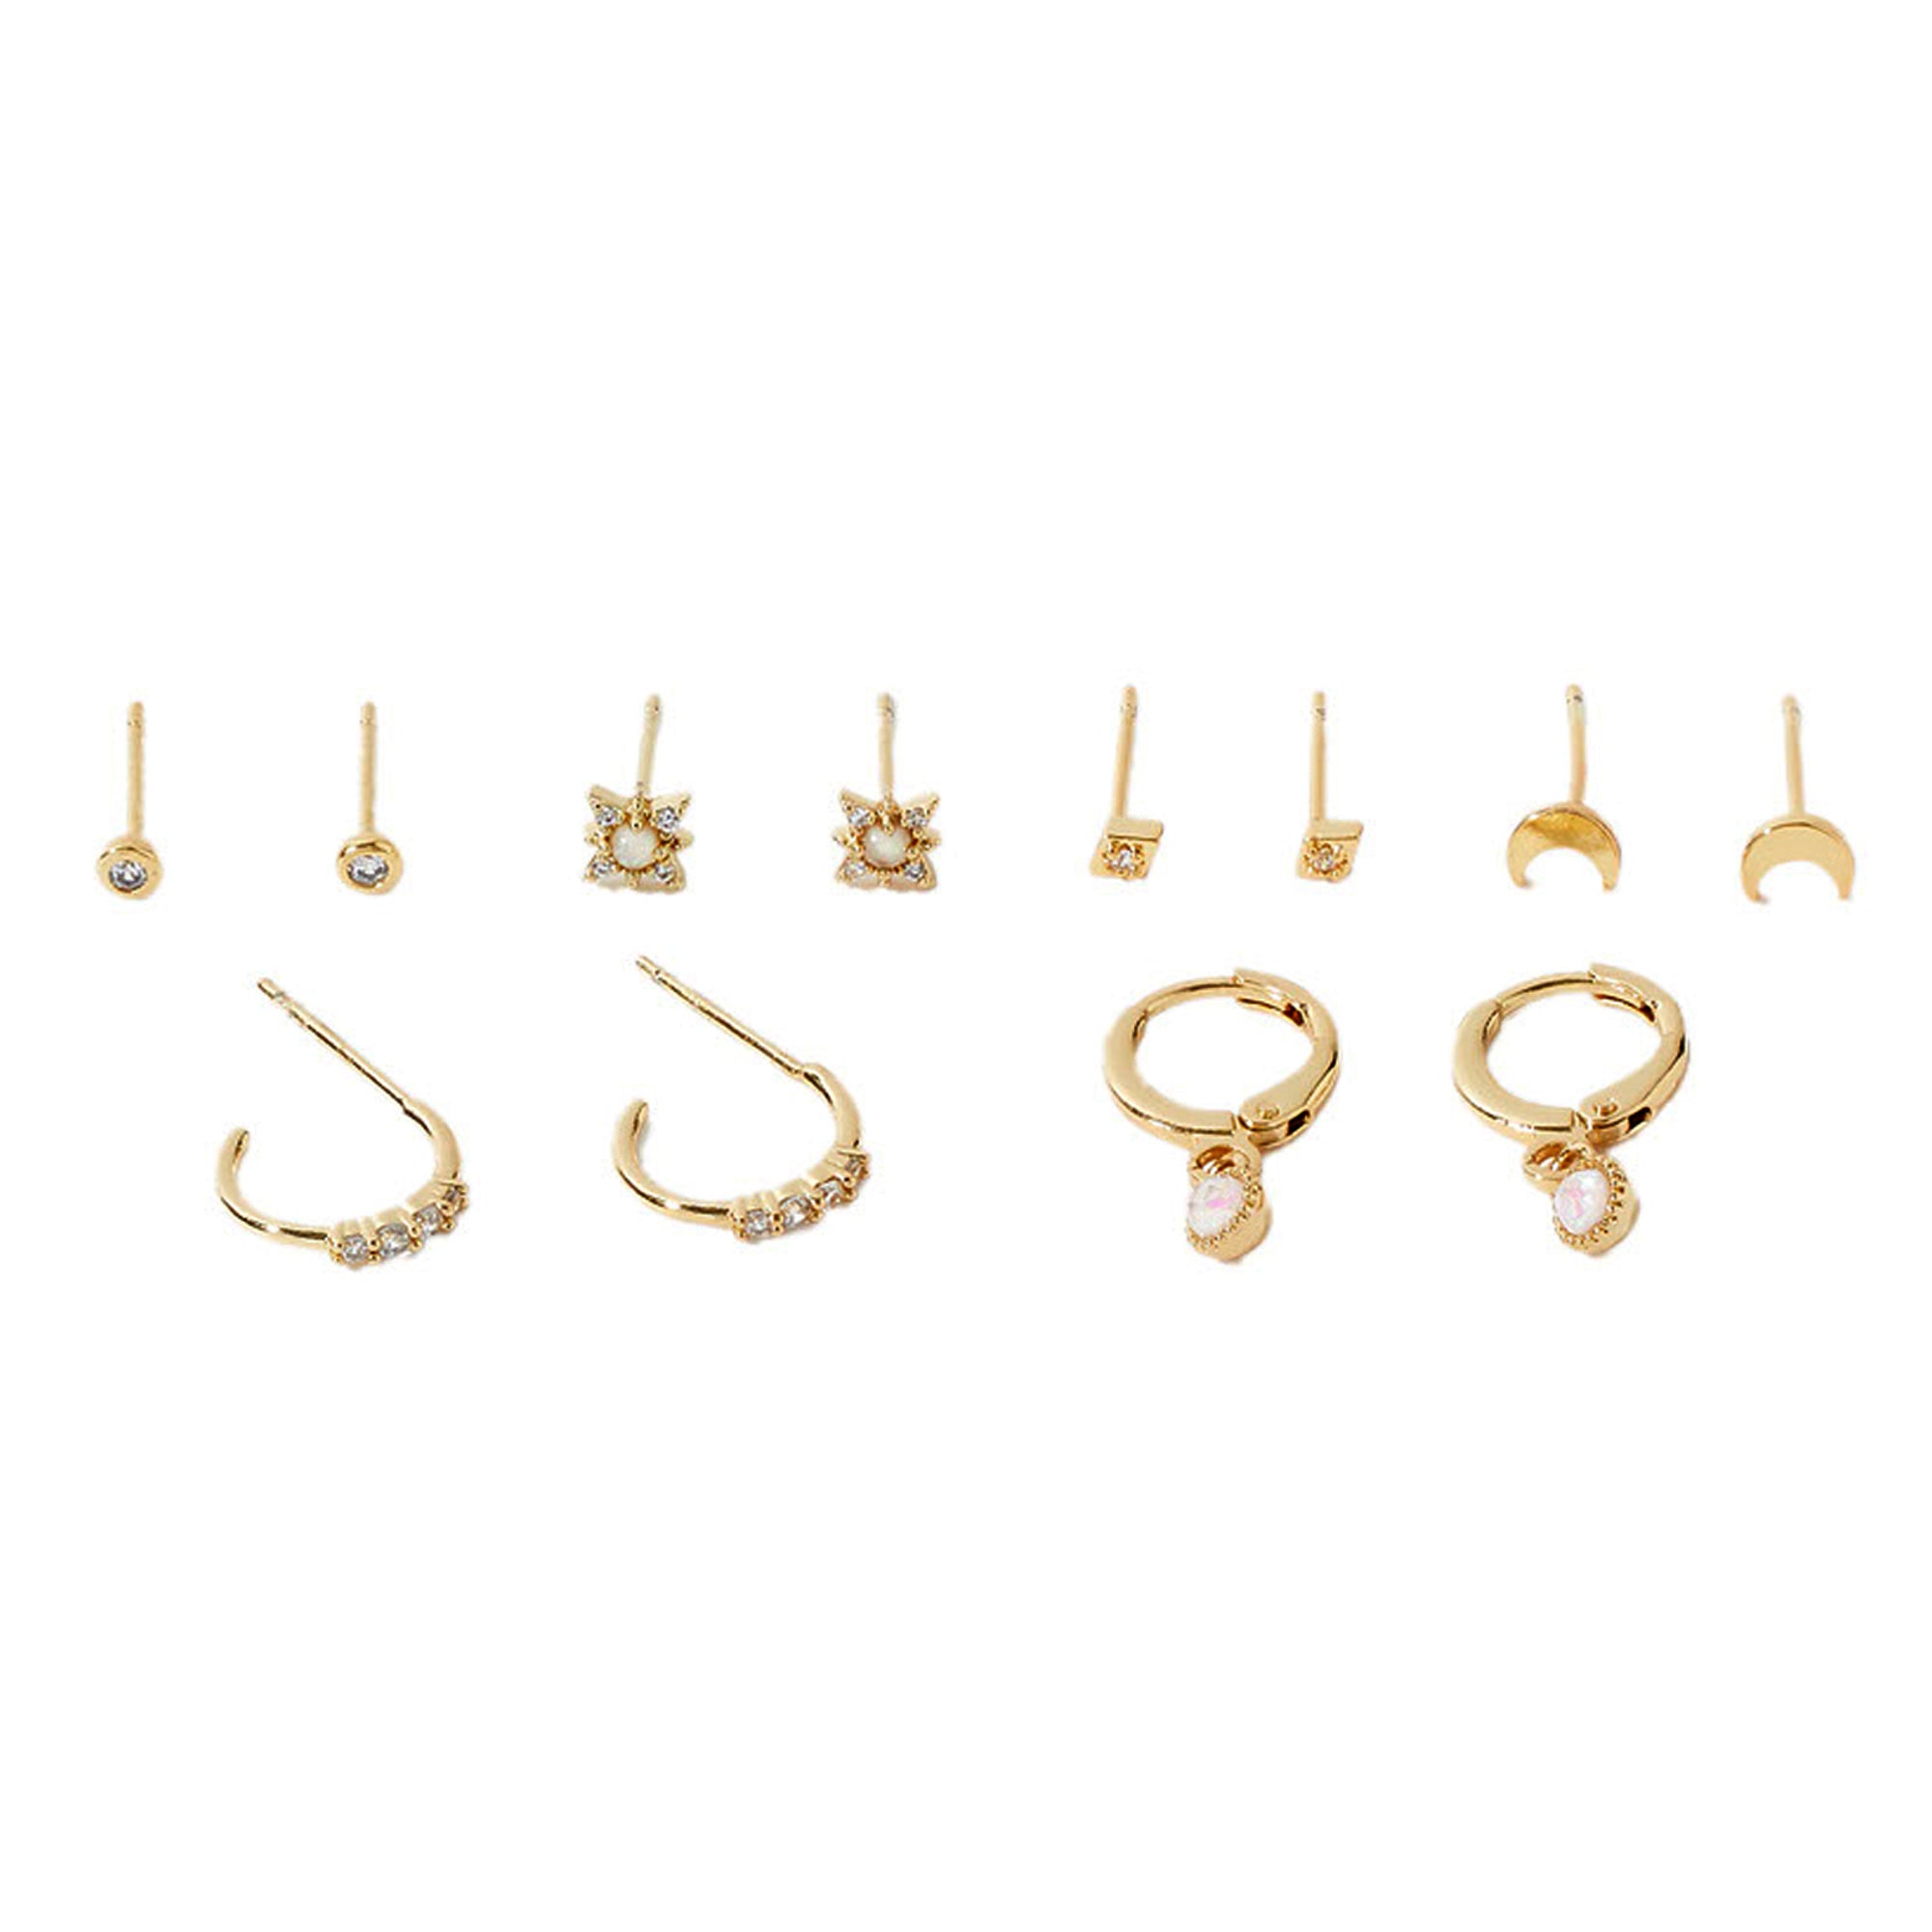 Real Gold Plated Opal Celestial 12 Pack Earring Set For Women By Accessorize London